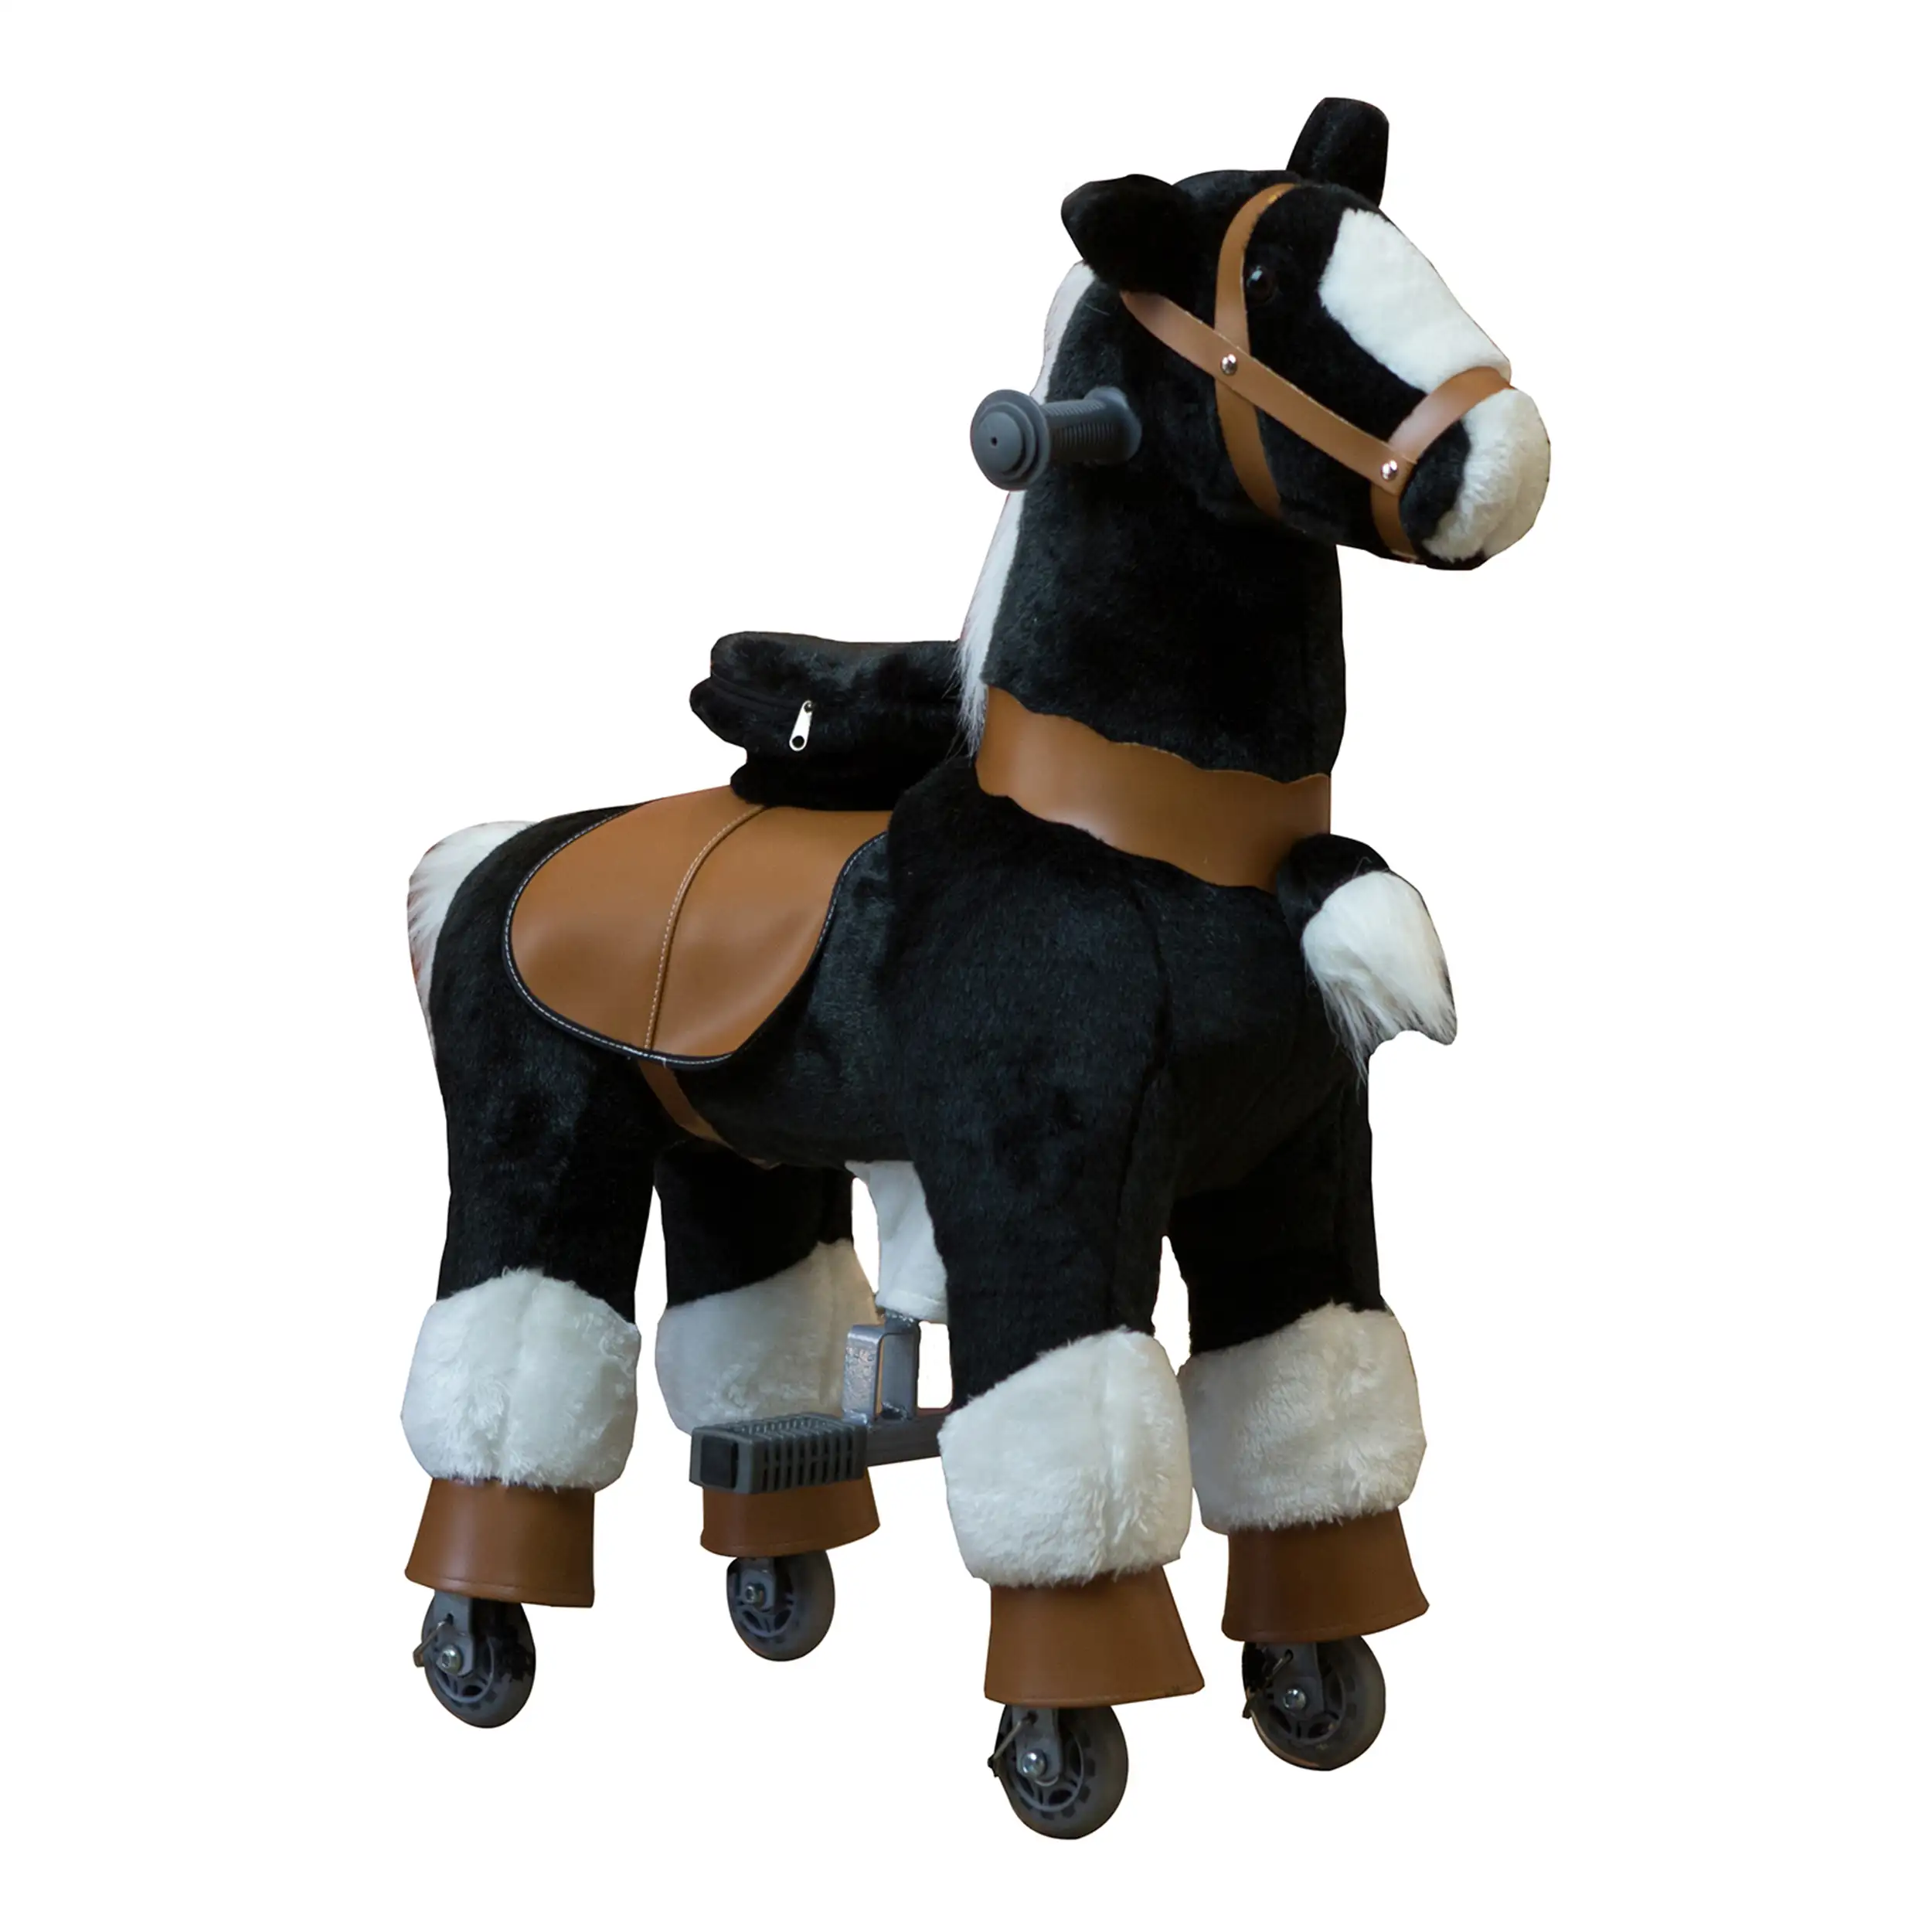 Ponyfunny kids ride on toy horse animal giocattoli di peluche ride zombie horse ride on pony horse with stick